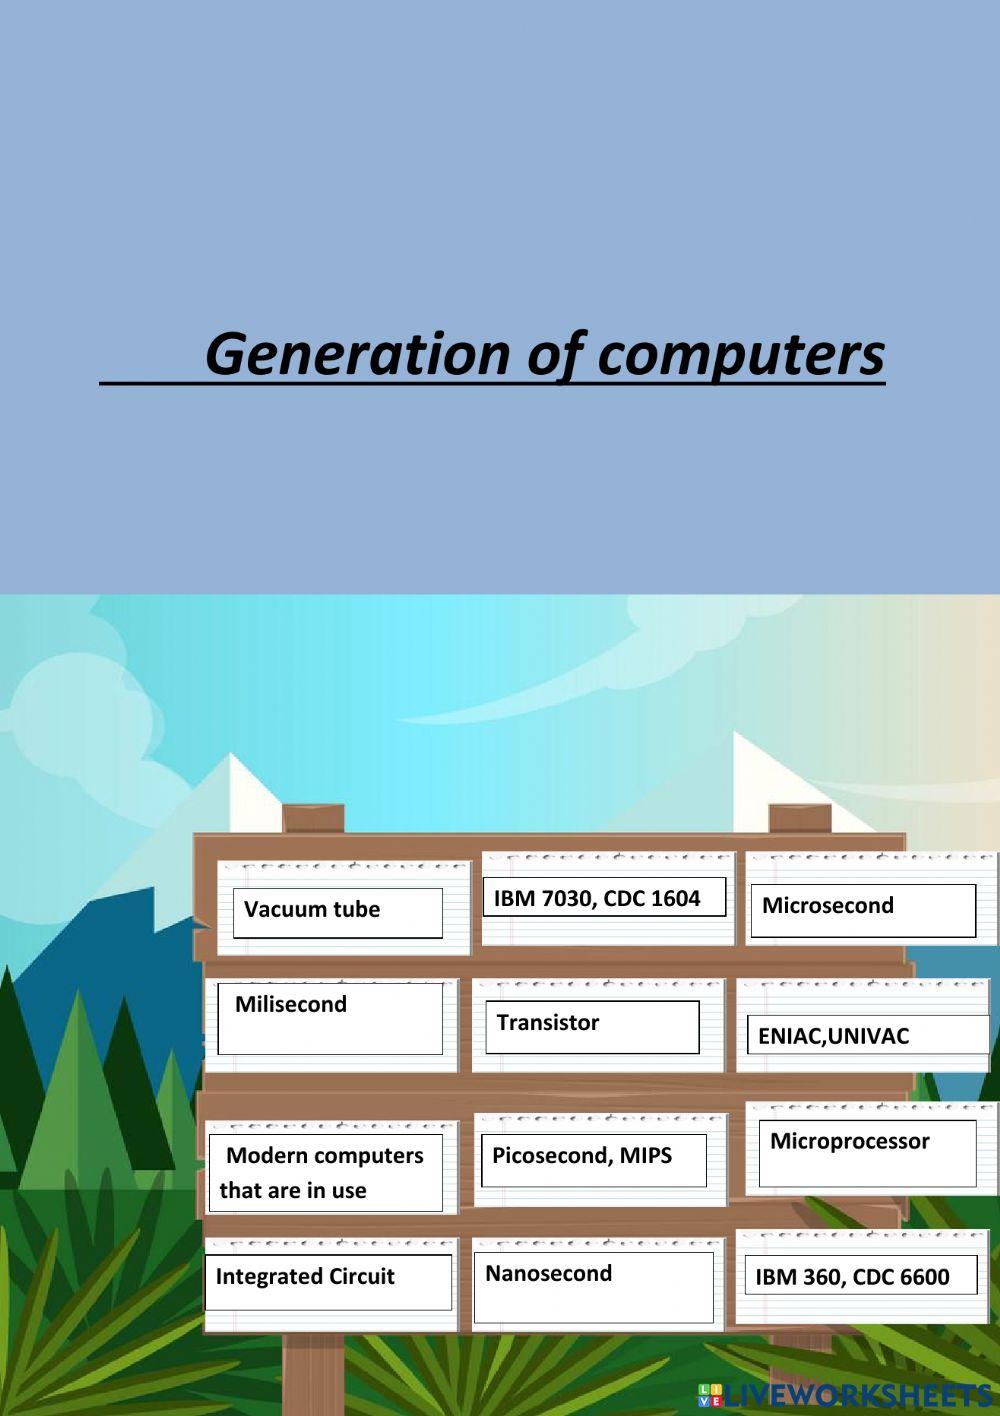 Generations of computers